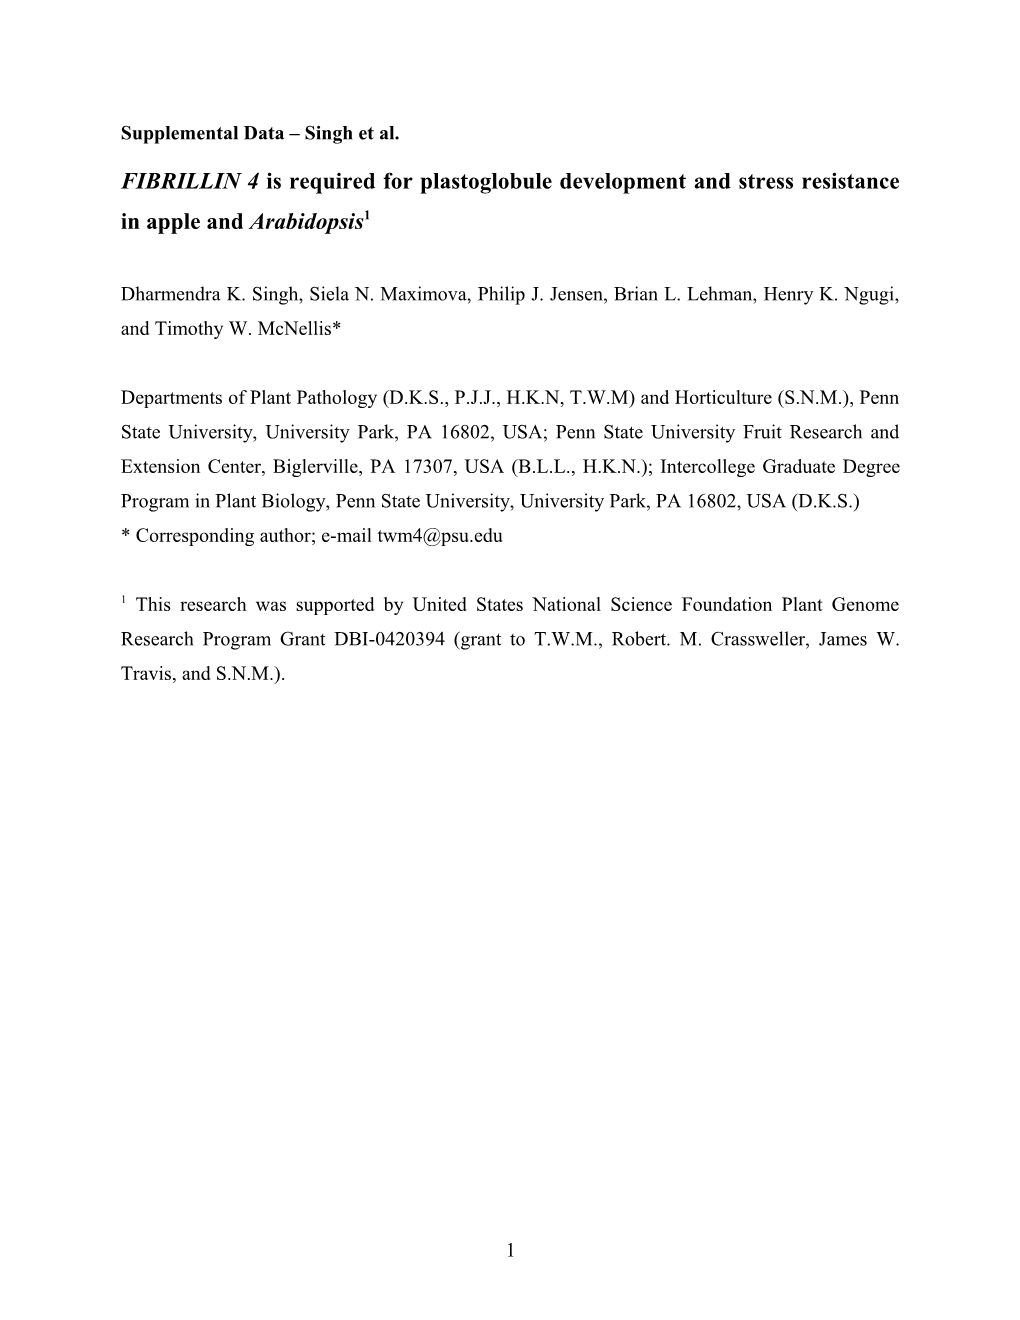 FIBRILLIN 4 Is Required for Plastoglobule Development and Stress Resistance in Apple And